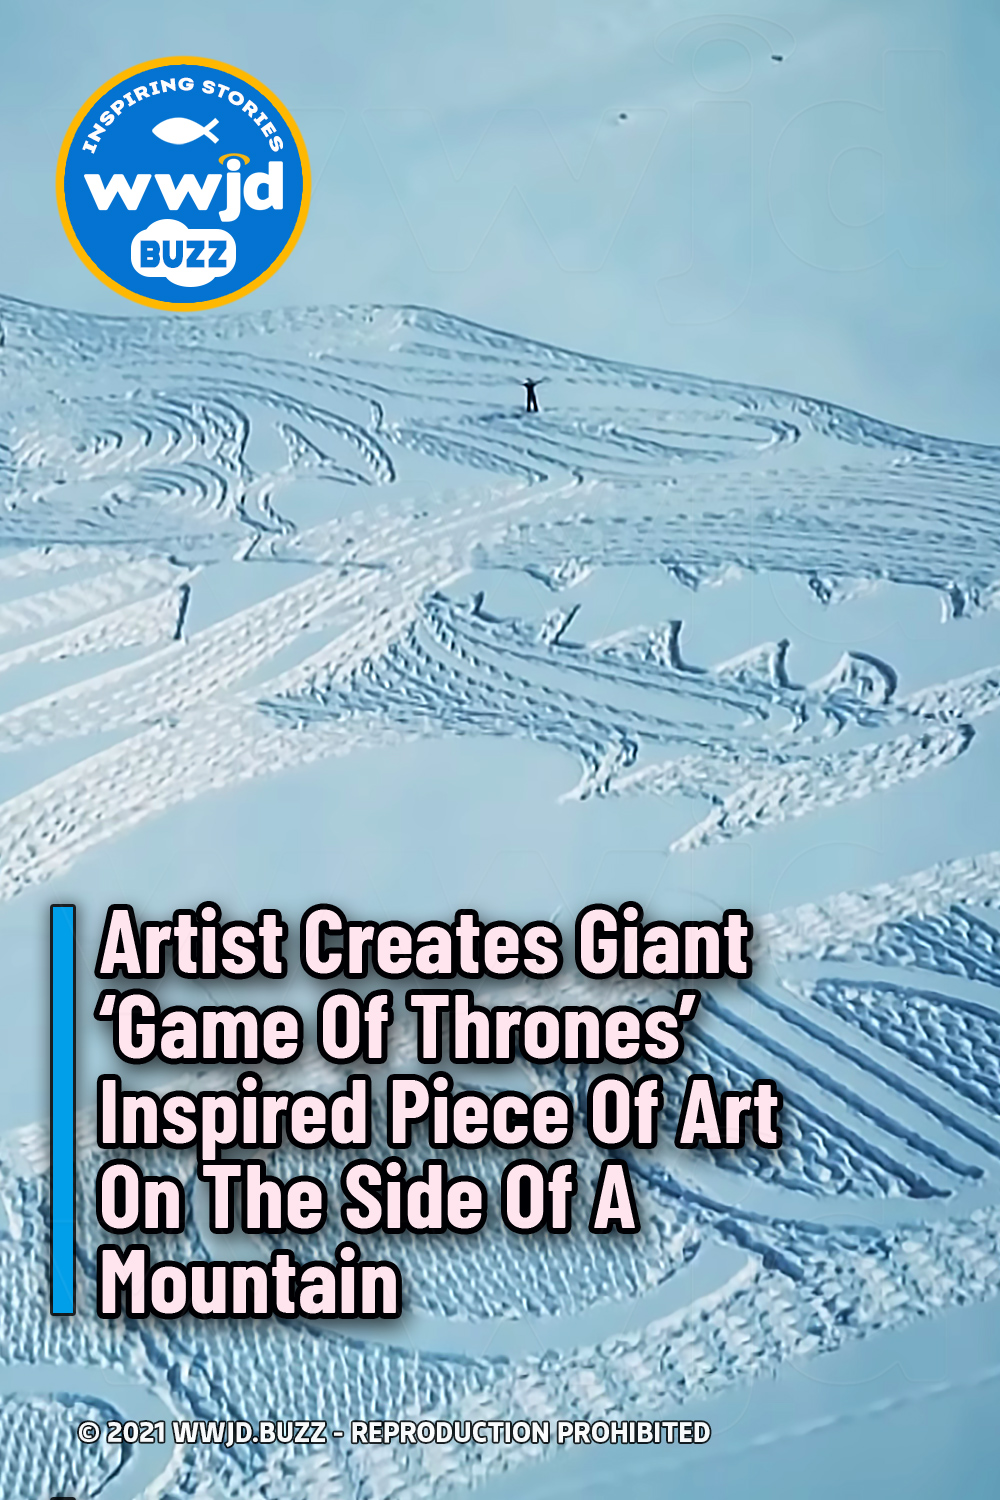 Artist Creates Giant ‘Game Of Thrones’ Inspired Piece Of Art On The Side Of A Mountain